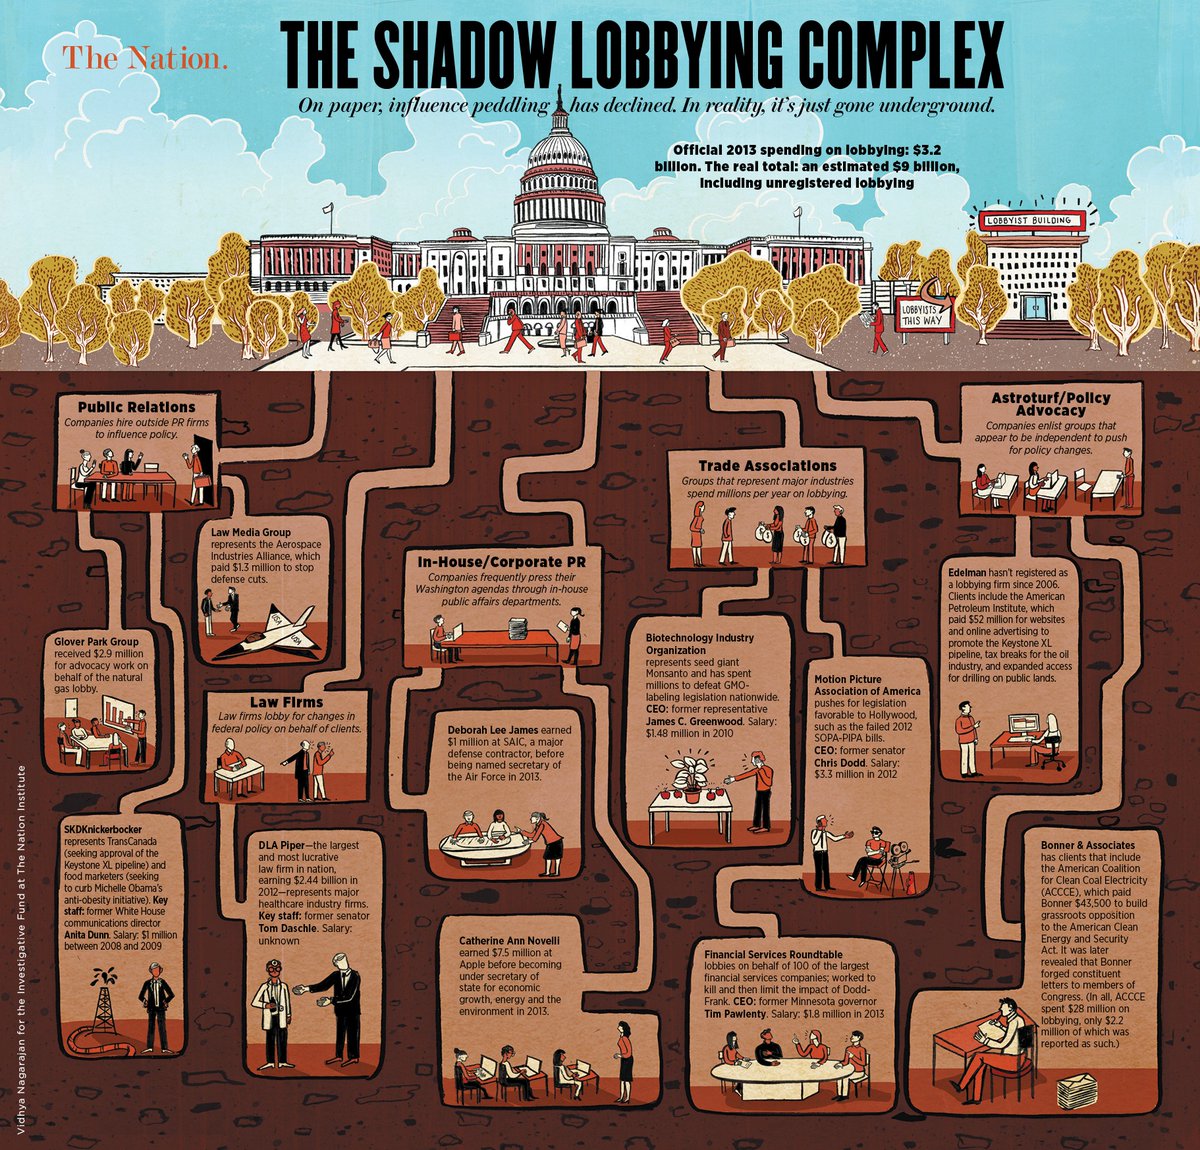 51) There were less than 70 lobbyists in Washington, DC in the late 1960s. That number steadily increased to 8,000 in the 1980s and has exploded to over 30,000 today. Lobbyists outnumber senators, congressmen, and their staffs 2 to 1.